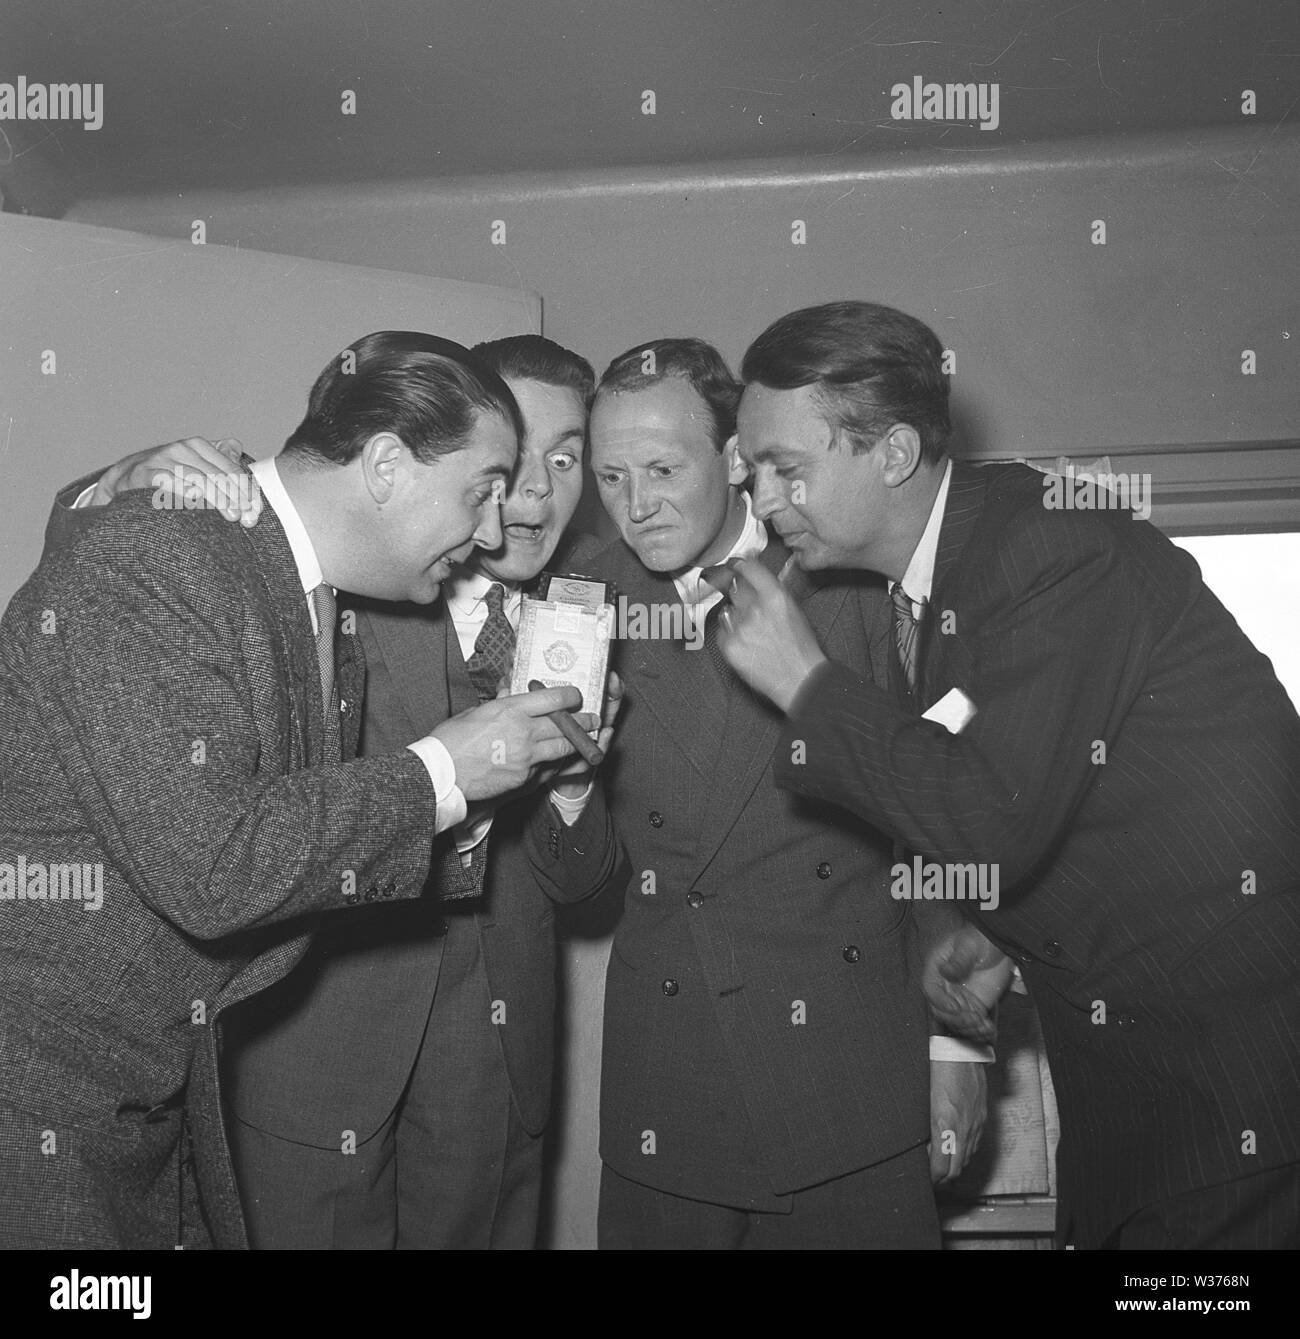 Men in the 1940s. A group of four men looks as if they have different opinions regarding the content of the opened cigar box. Sweden 1945. Kristoffersson P124-2 Stock Photo